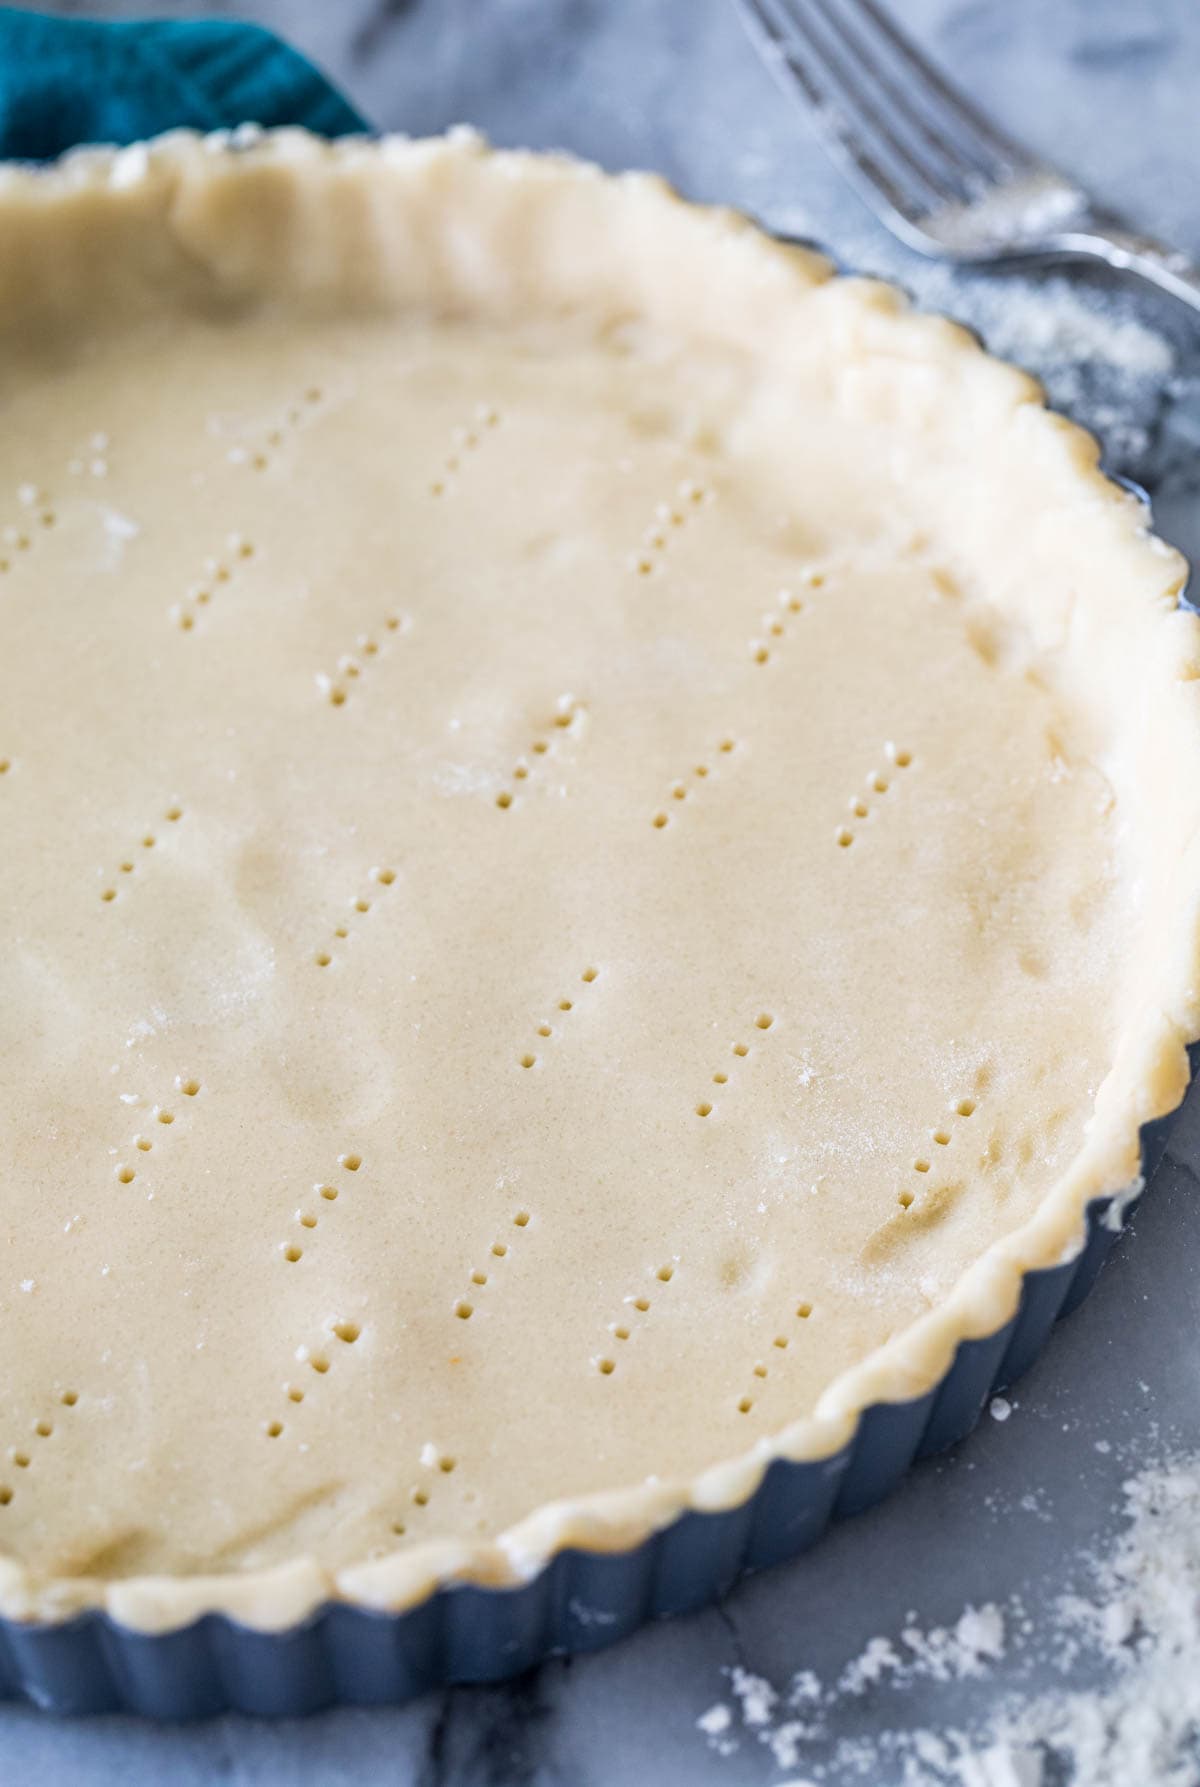 Close-up view of an unbaked tart crust that's been pricked with a fork.